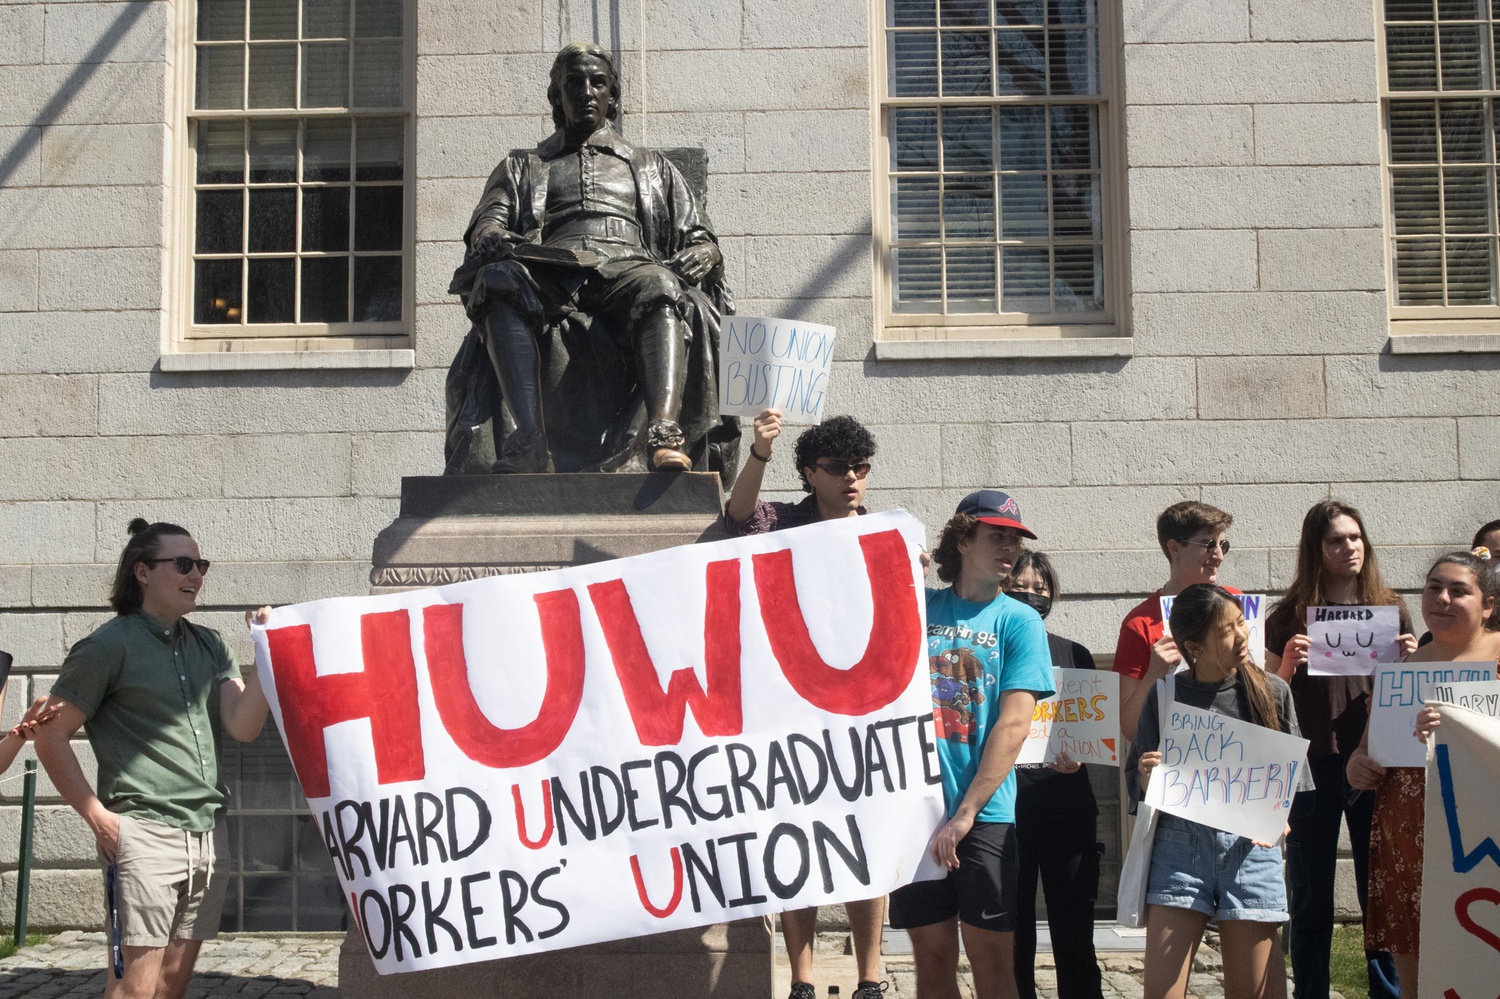 Undergraduate workers rallied for a union in Harvard Yard in April after the University denied the group's rally for voluntary recognition.